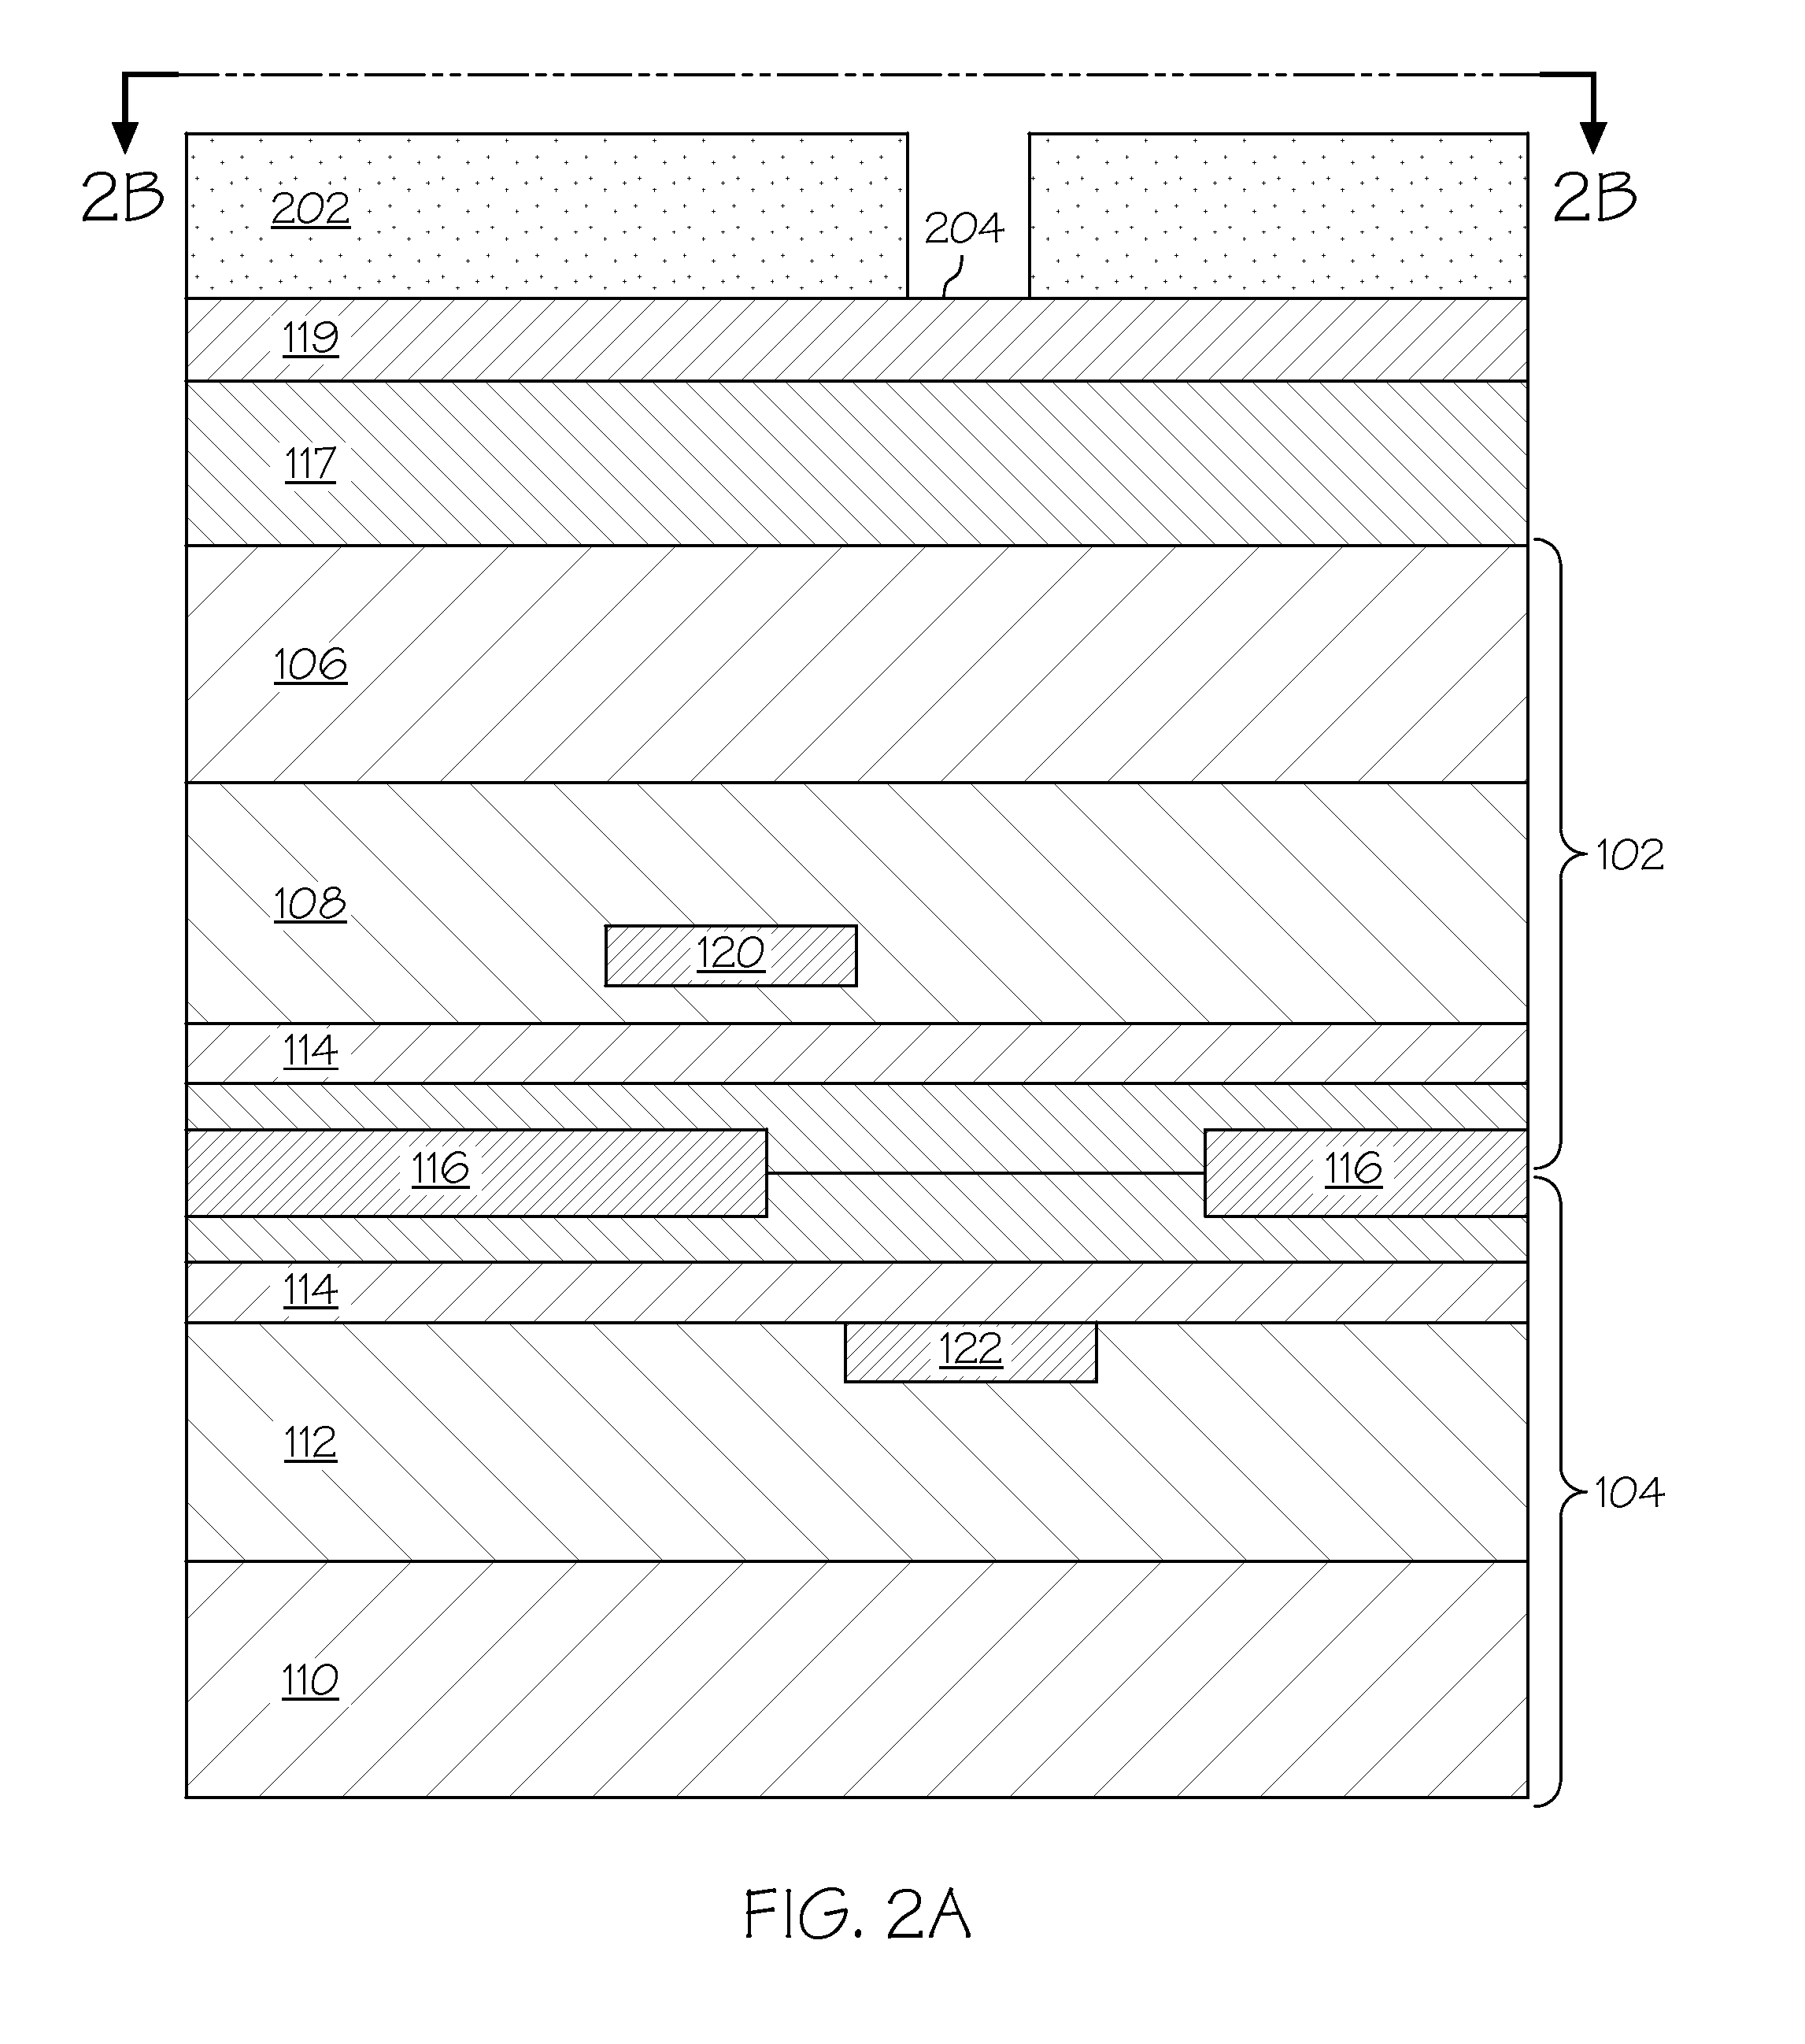 Three Dimensional Integration and Methods of Through Silicon Via Creation